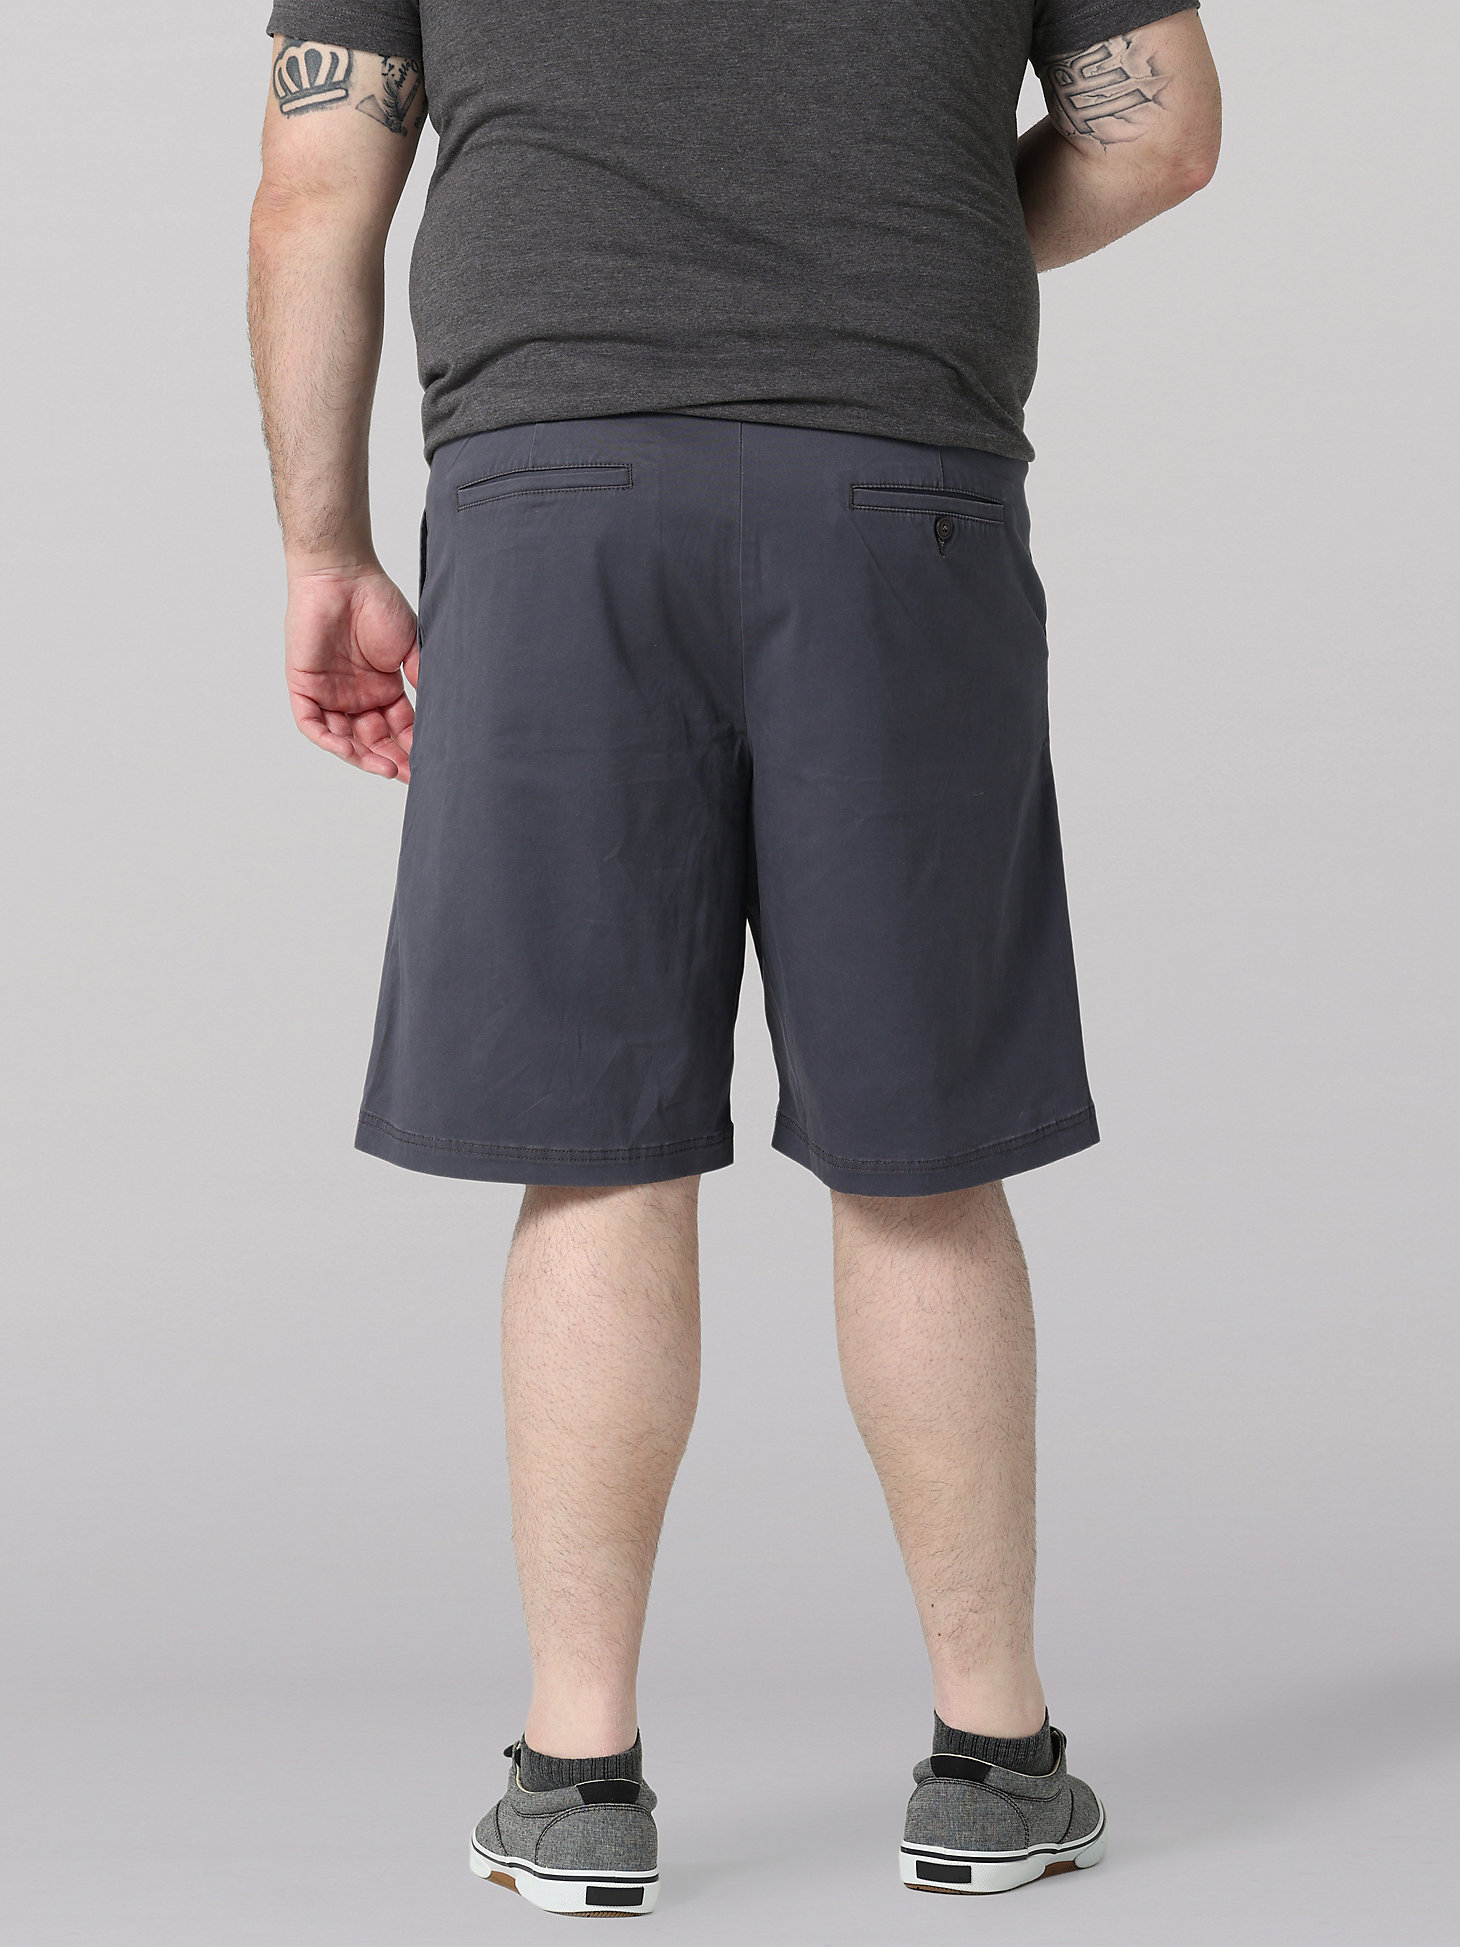 Men's Extreme Comfort MVP Flat Front Short in Charcoal alternative view 1